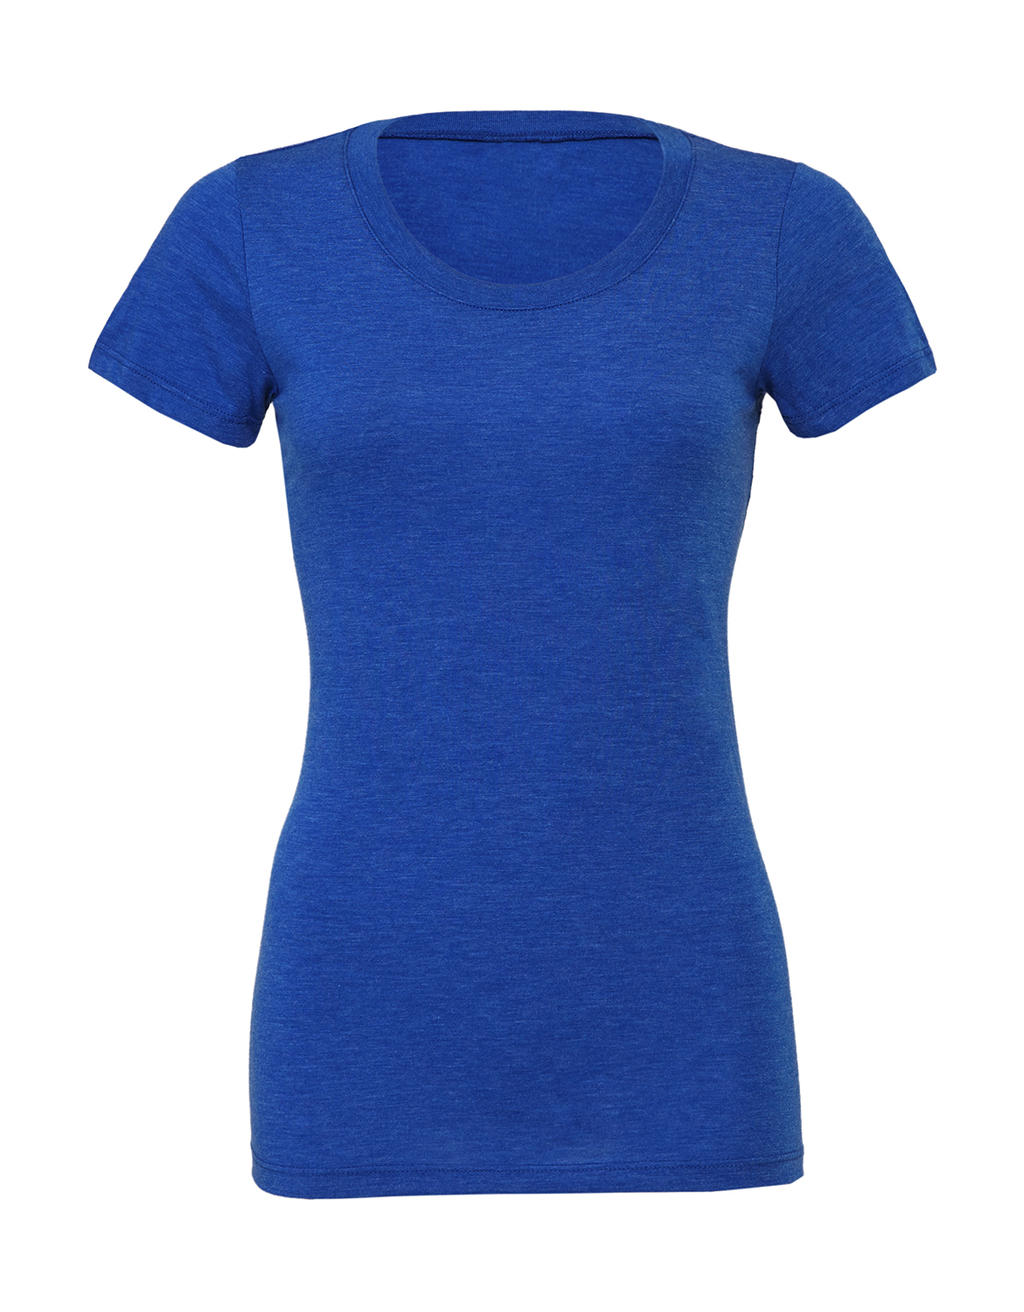  Triblend Crew Neck T-Shirt in Farbe True Royal Triblend